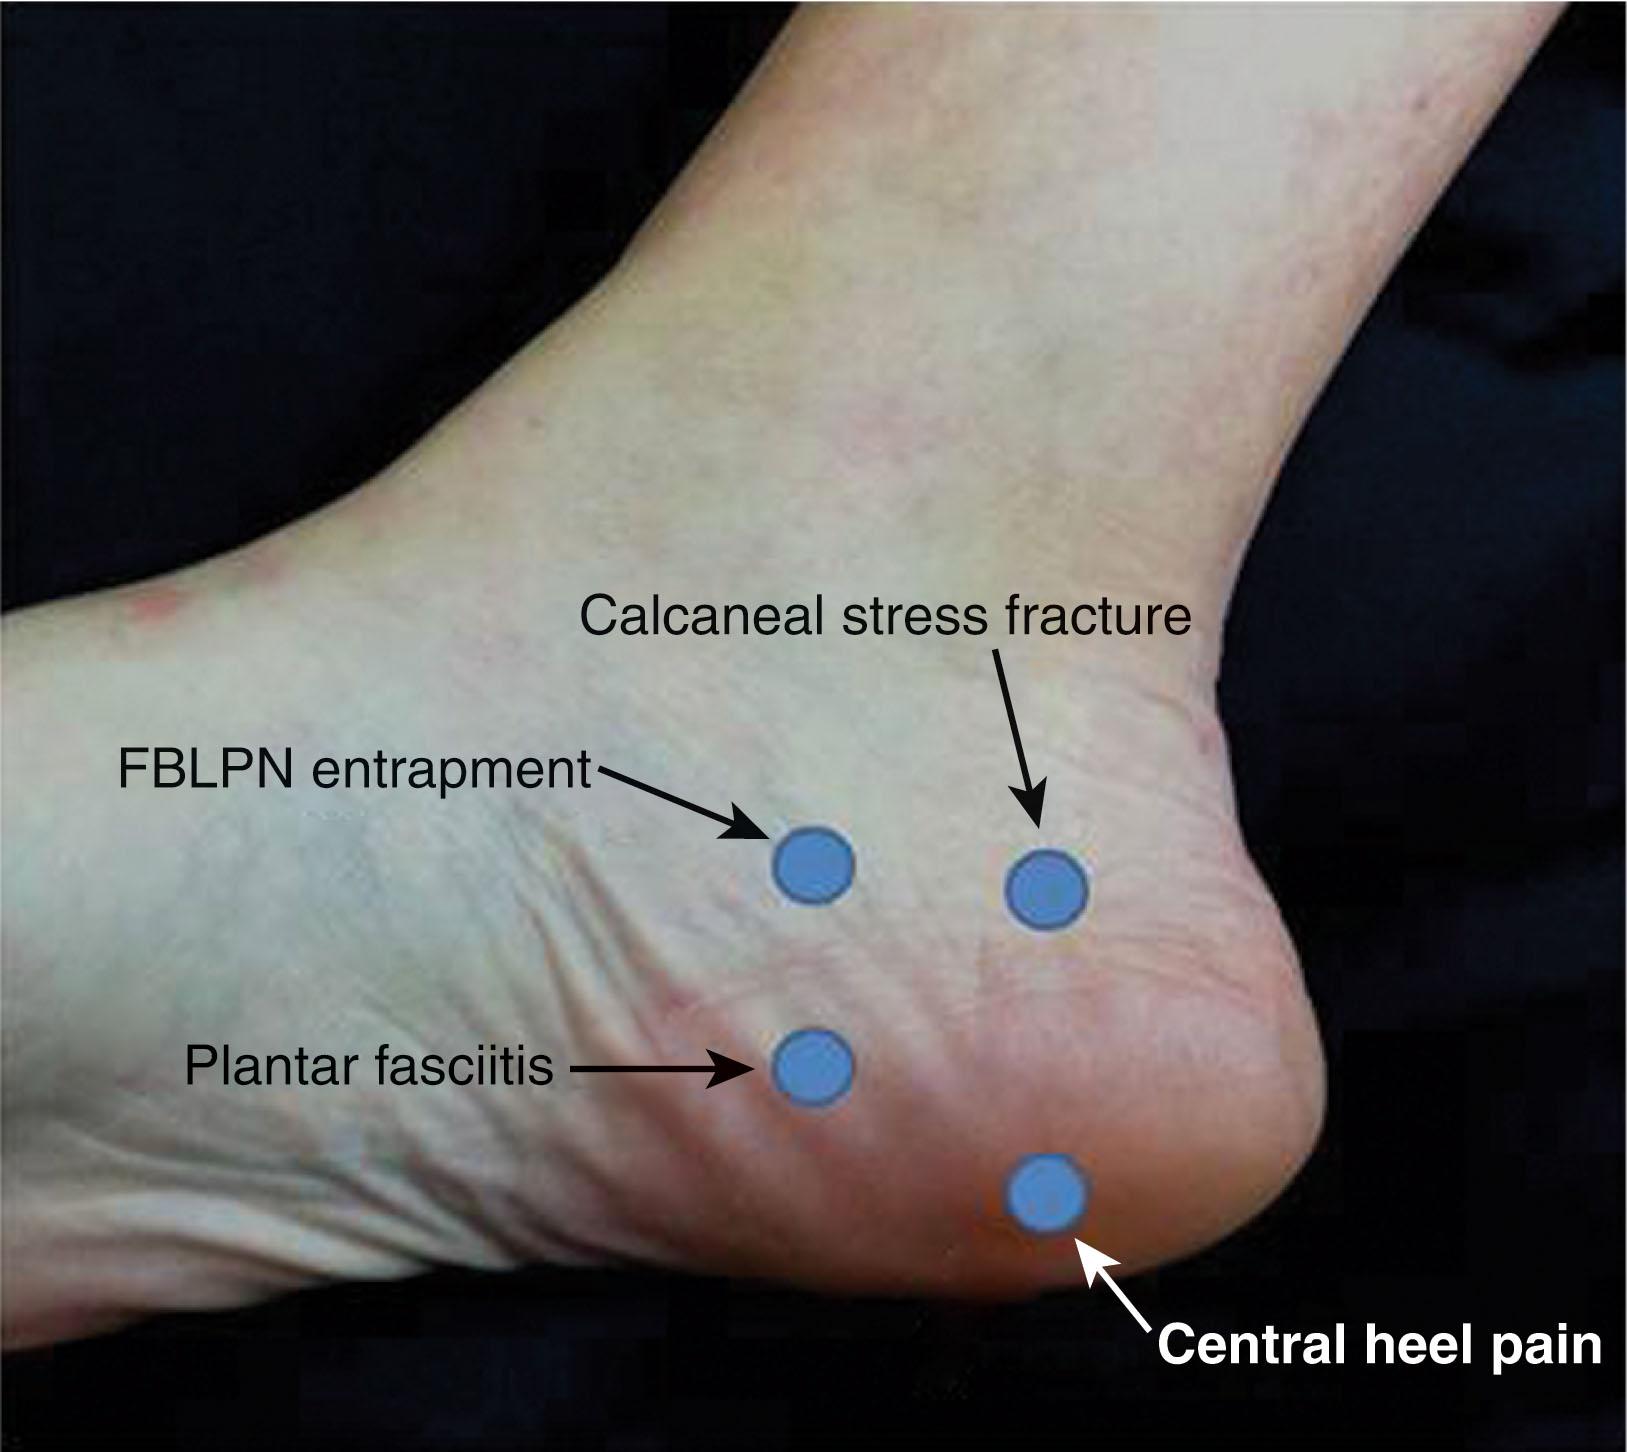 Fig. 12-5, Physical examination findings of tenderness indicative of calcaneal stress fracture, first branch of the lateral plantar nerve (FBLPN) entrapment, proximal plantar fasciitis, and central heel pain.